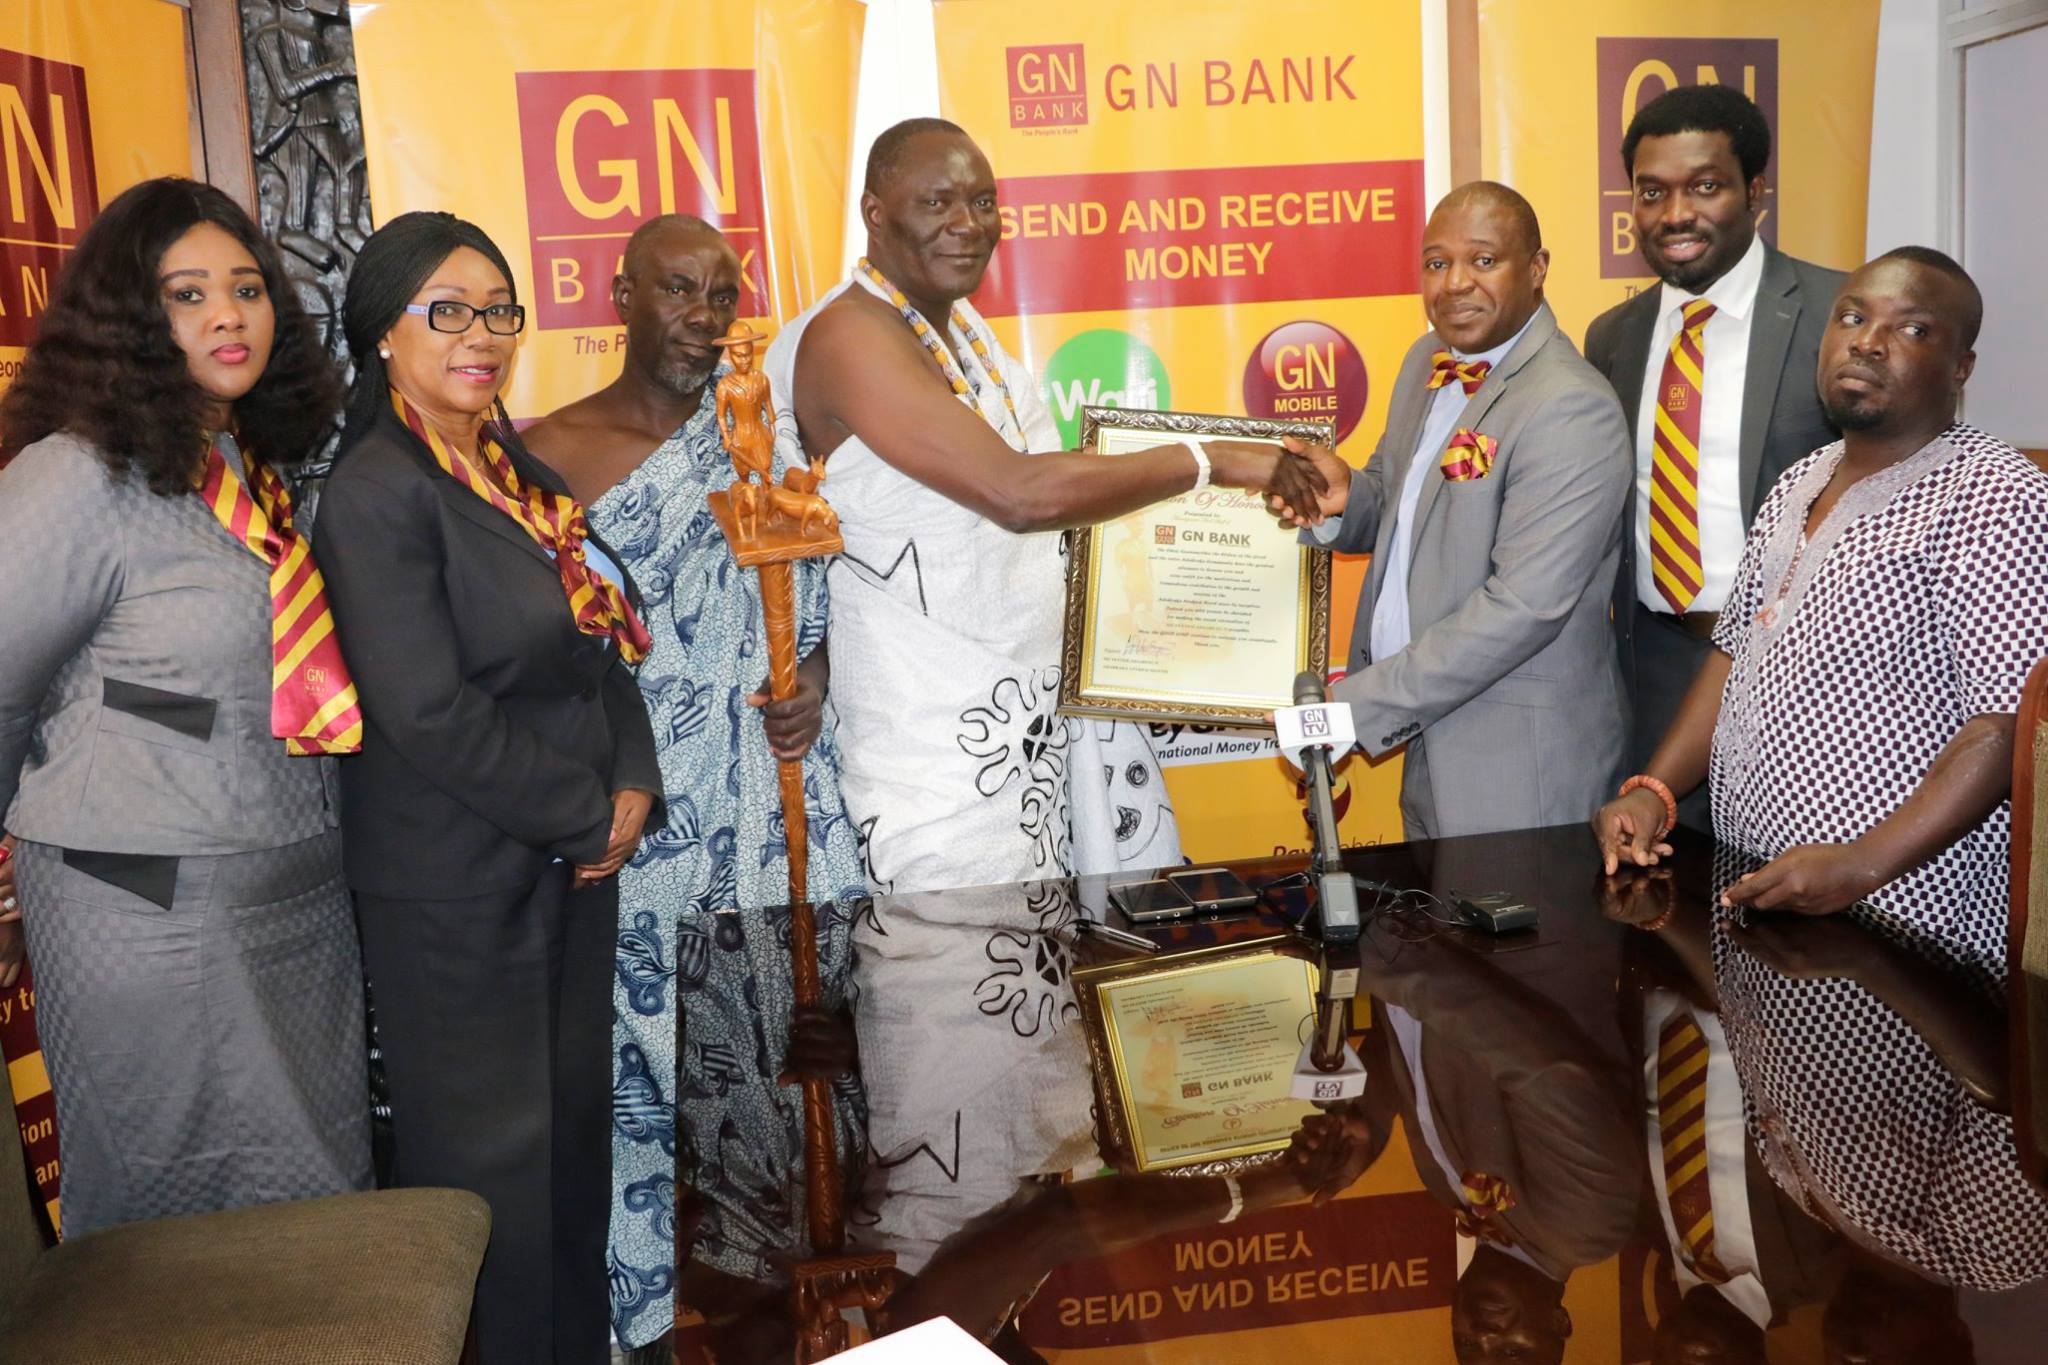 Adabraka Chief honours GN Bank for supporting local development